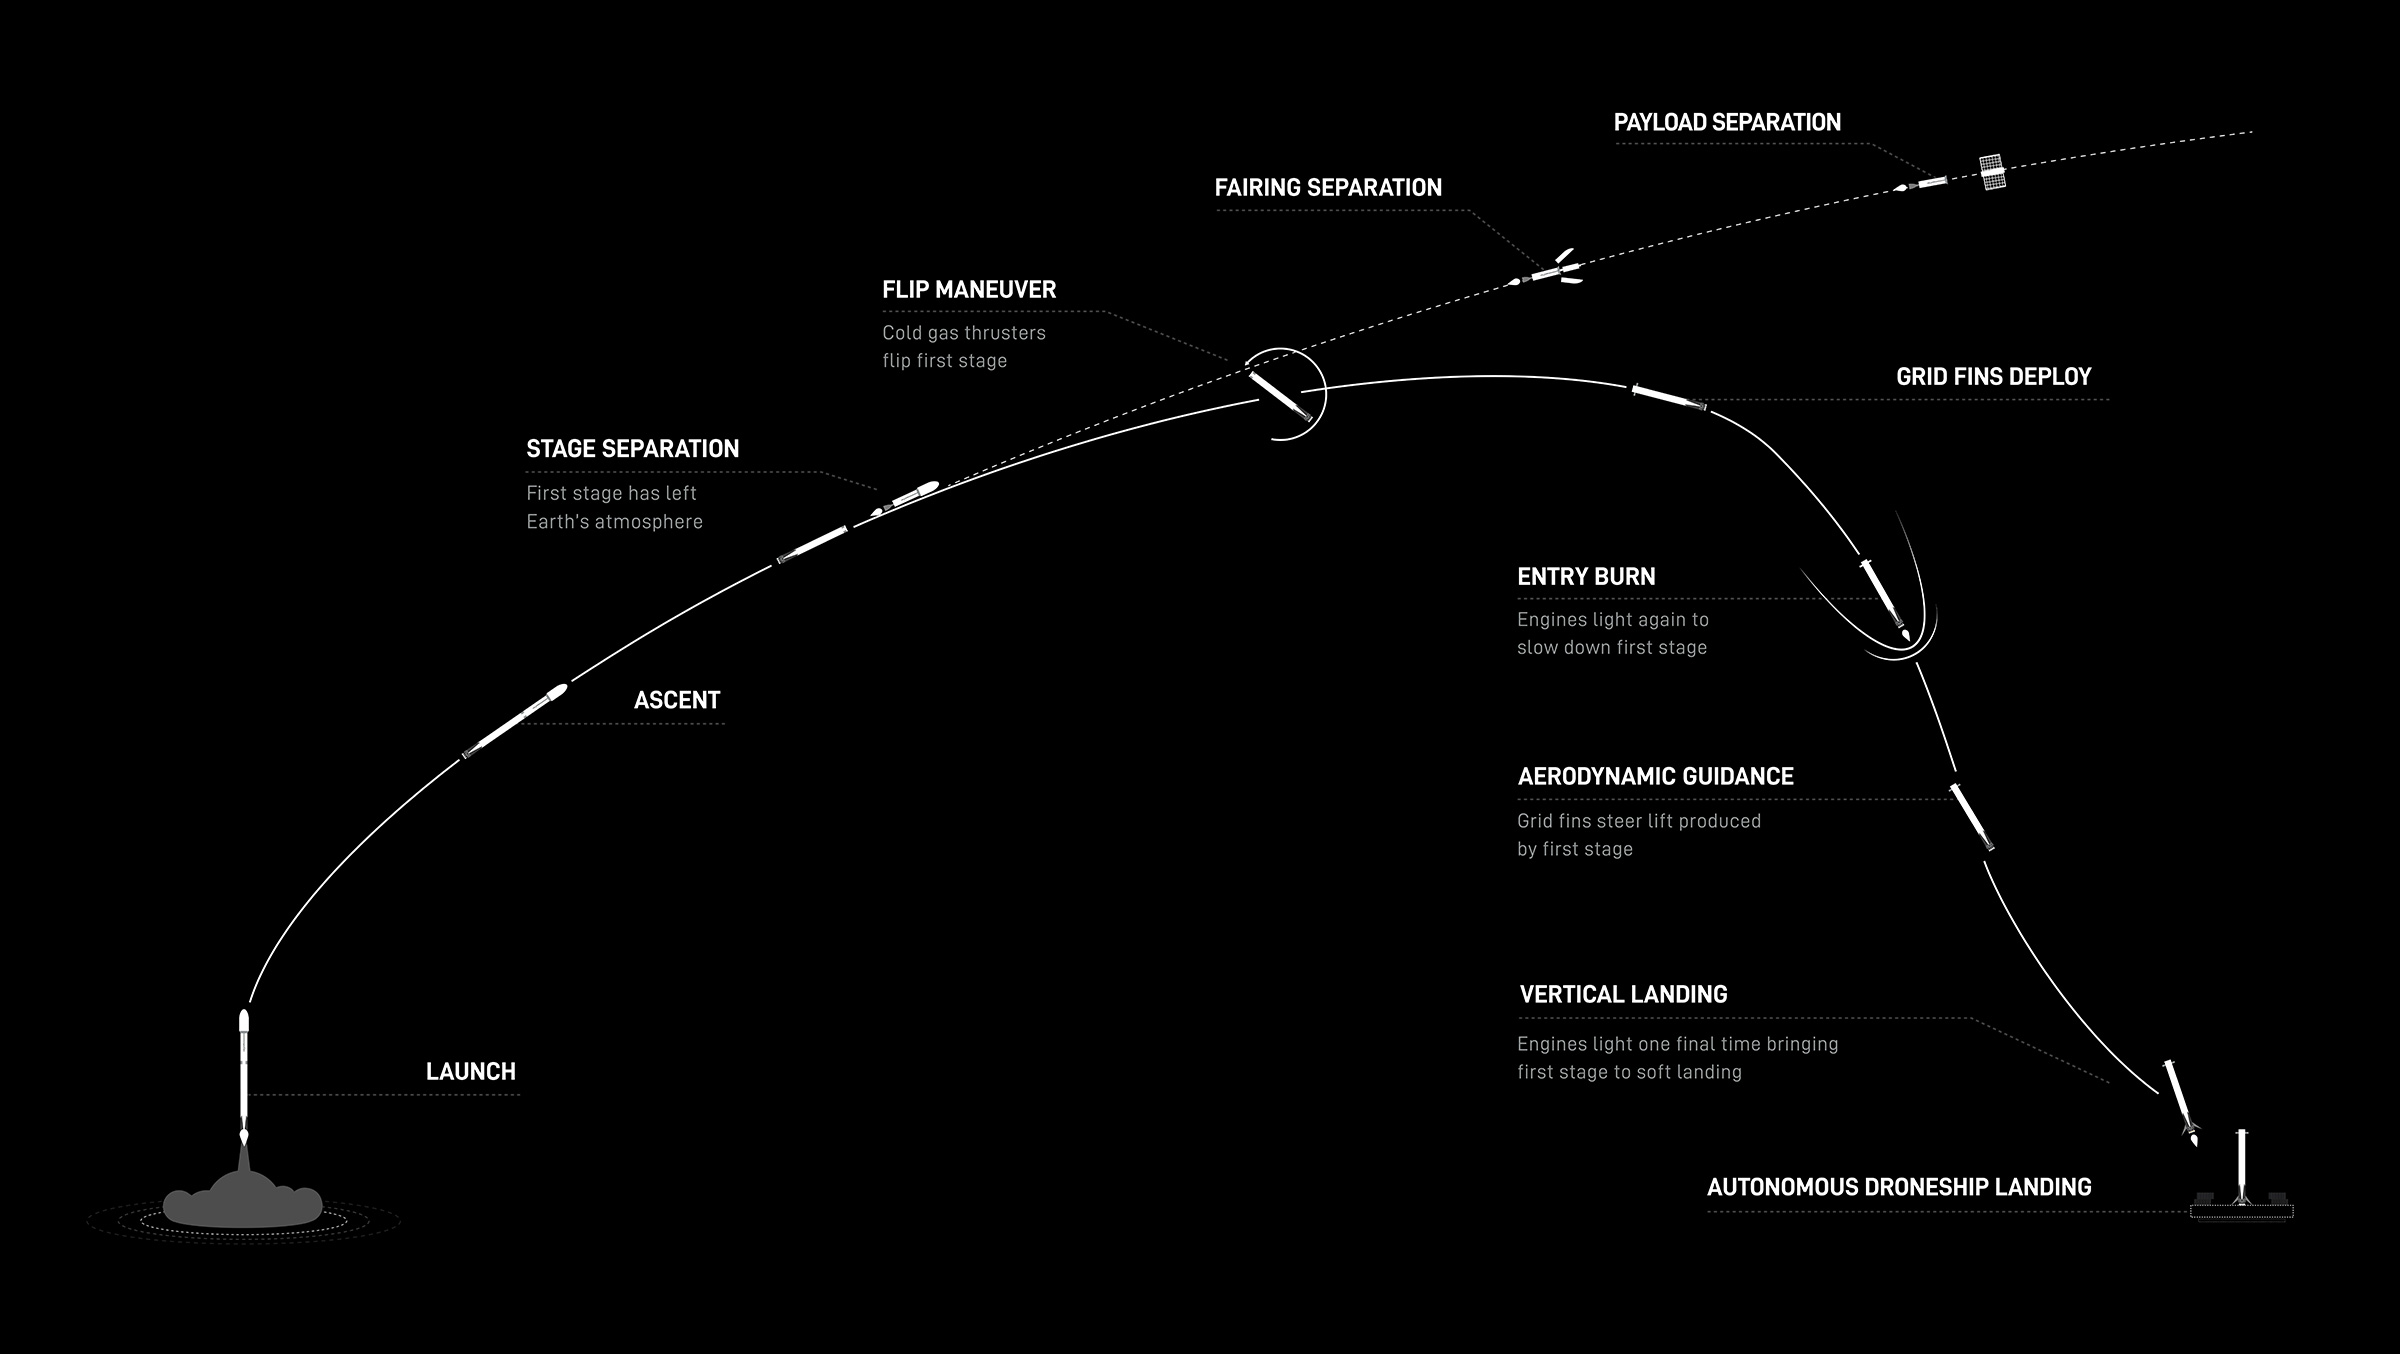 spacex future timeline